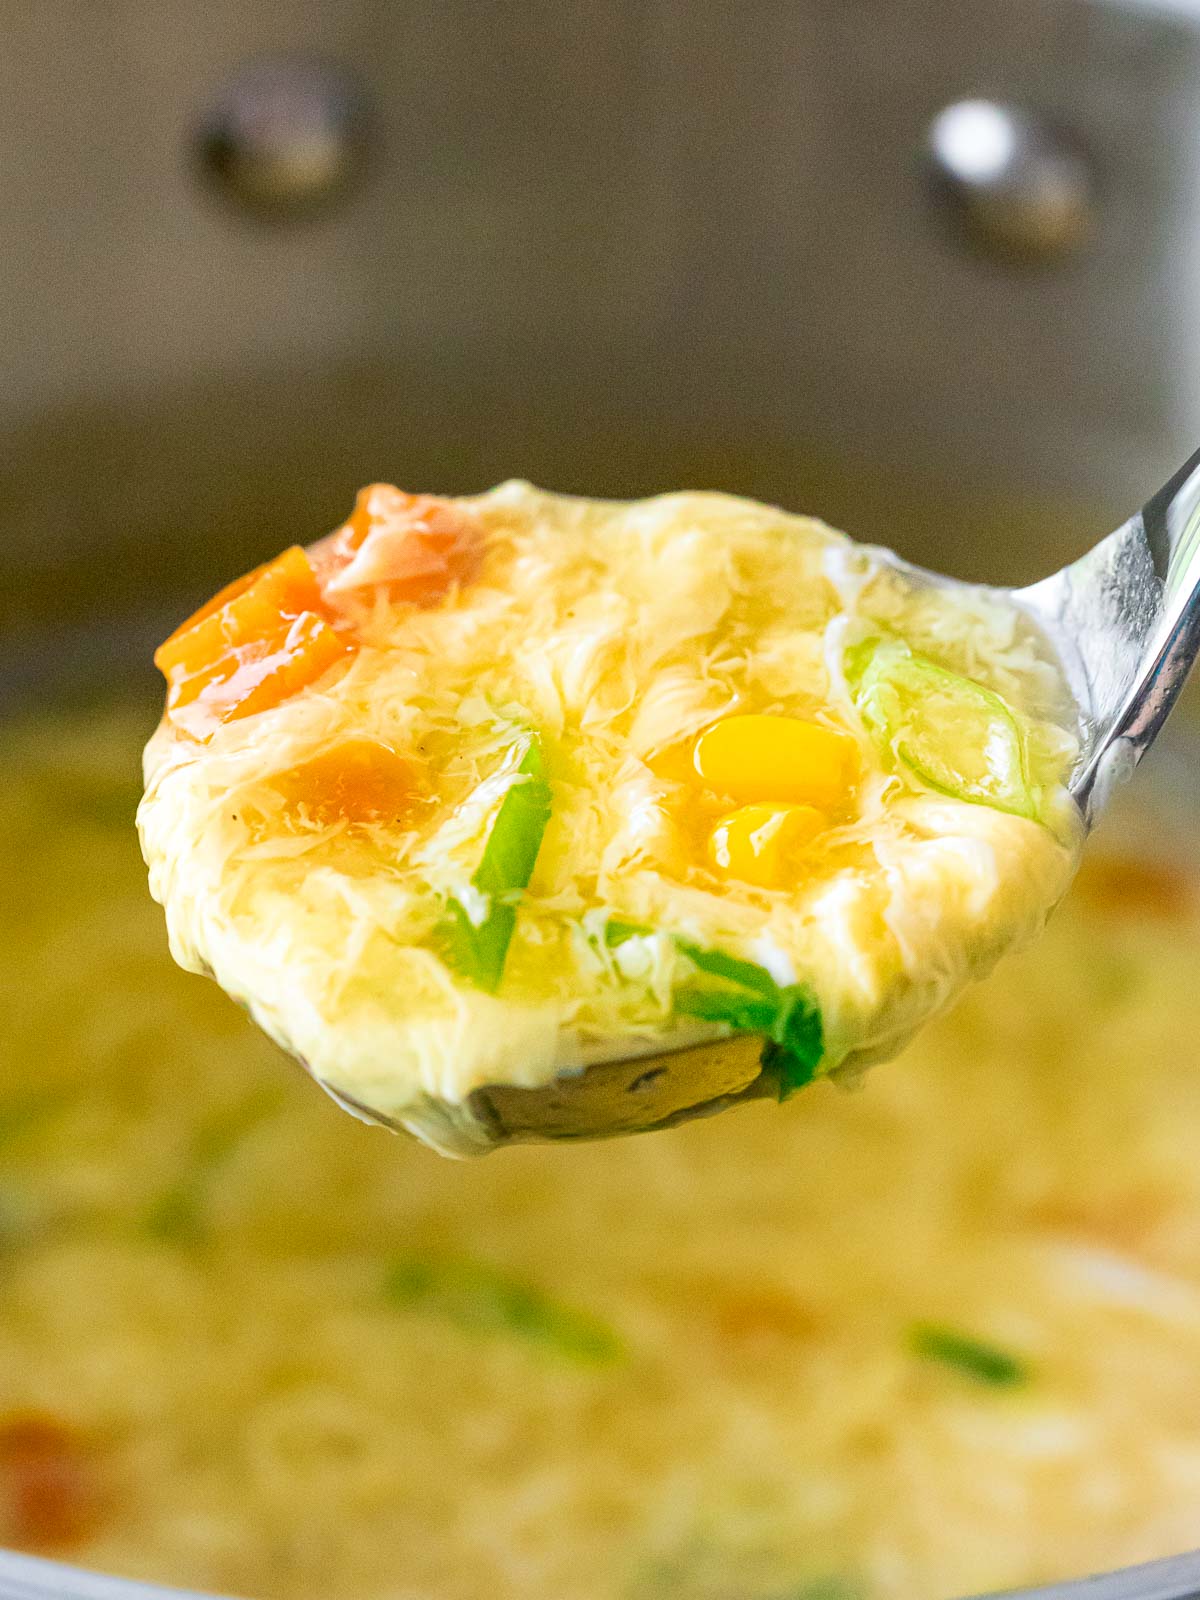 ladle full of authentic egg drop soup with corn and carrots